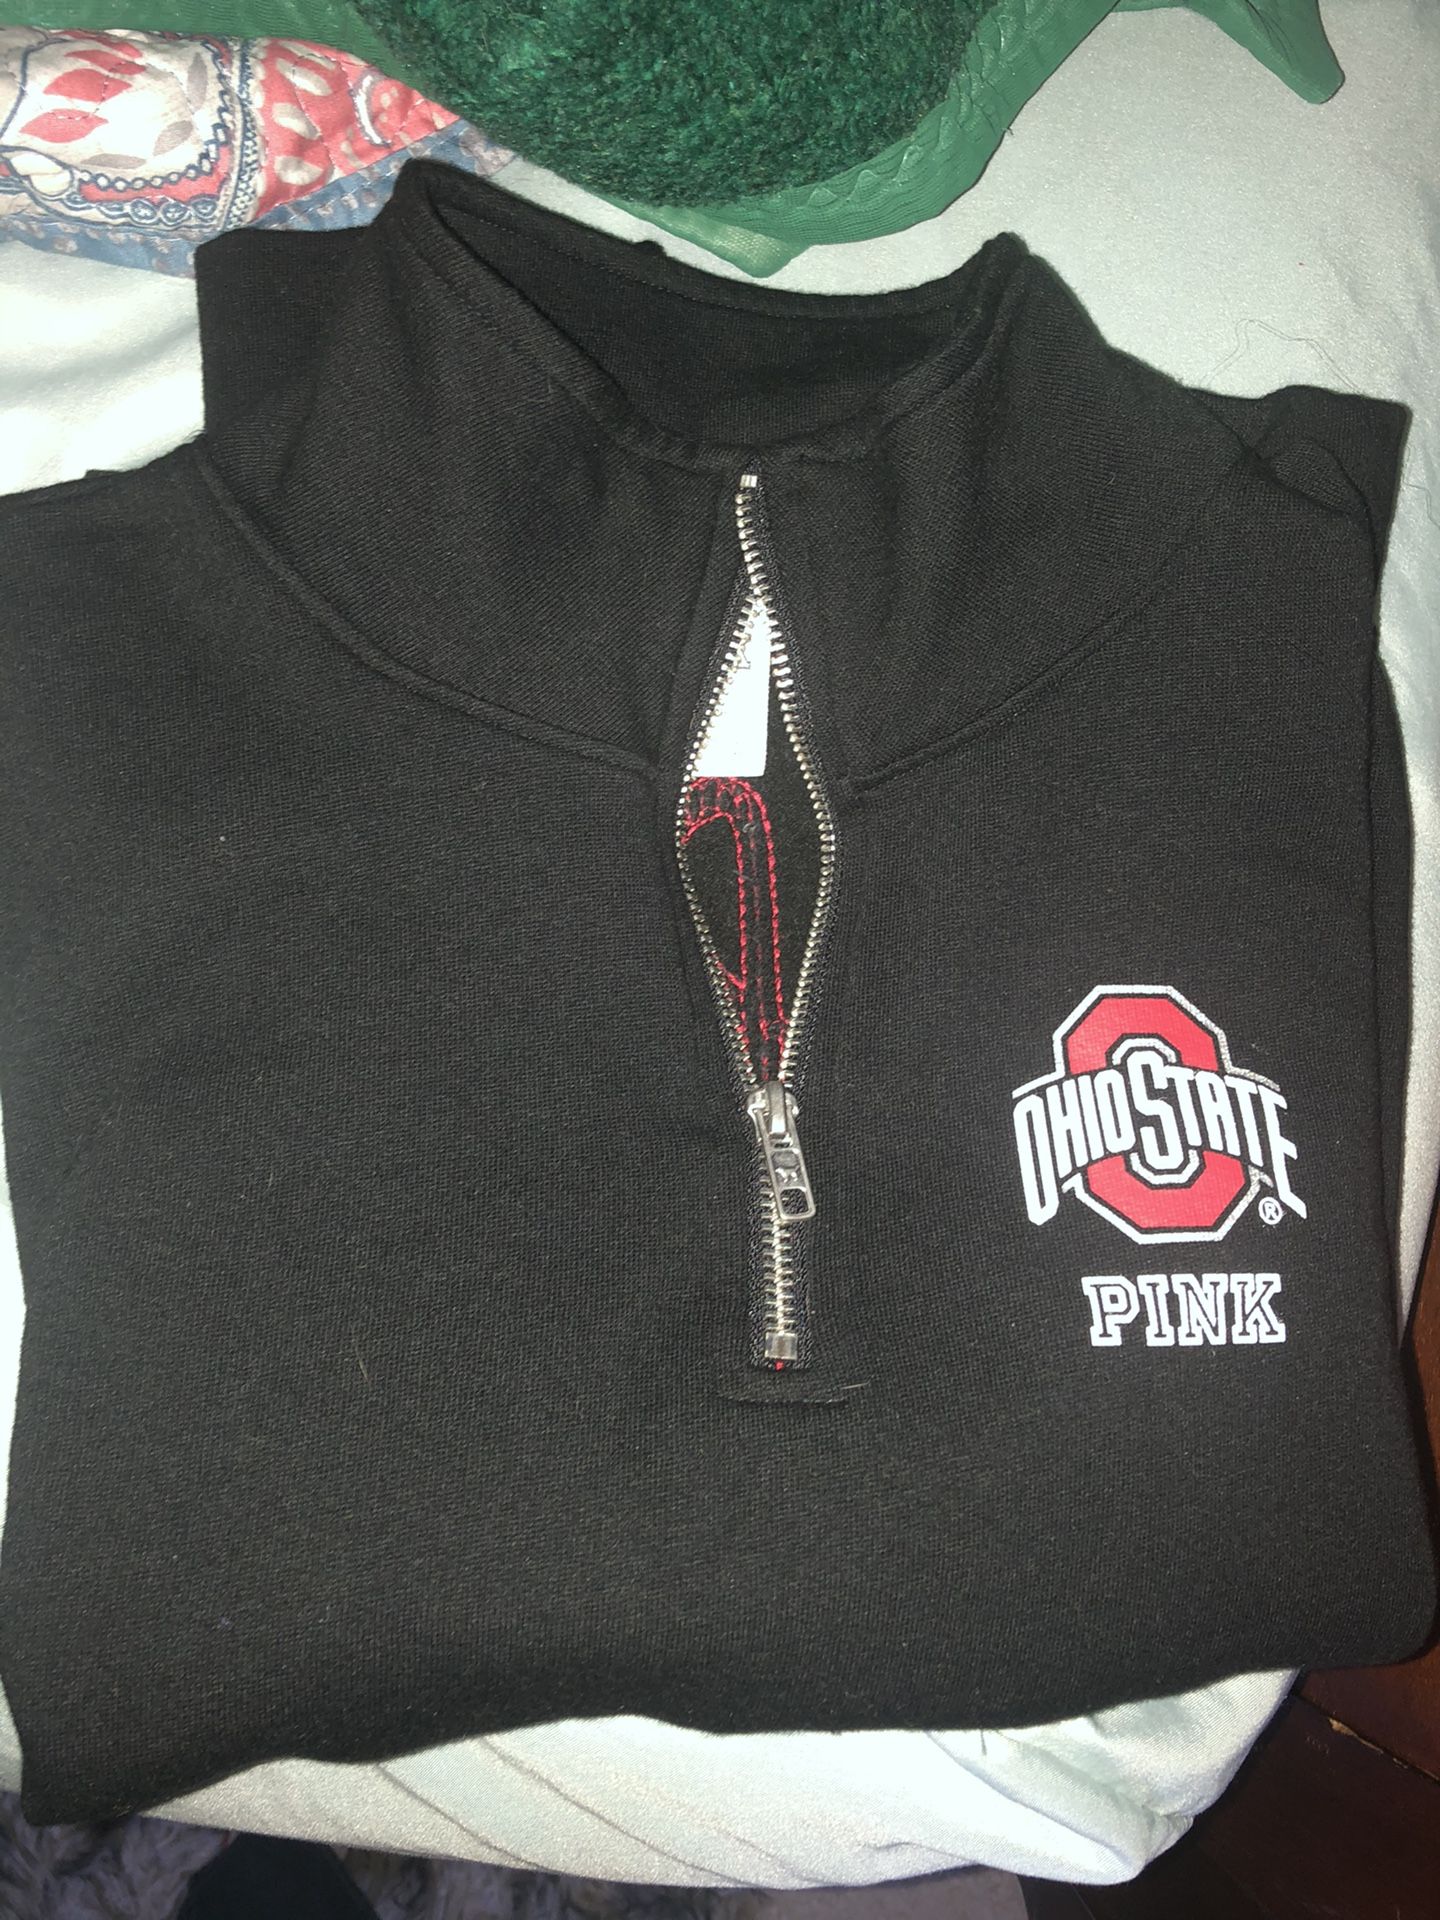 Ohio state Pink Pullover Xs